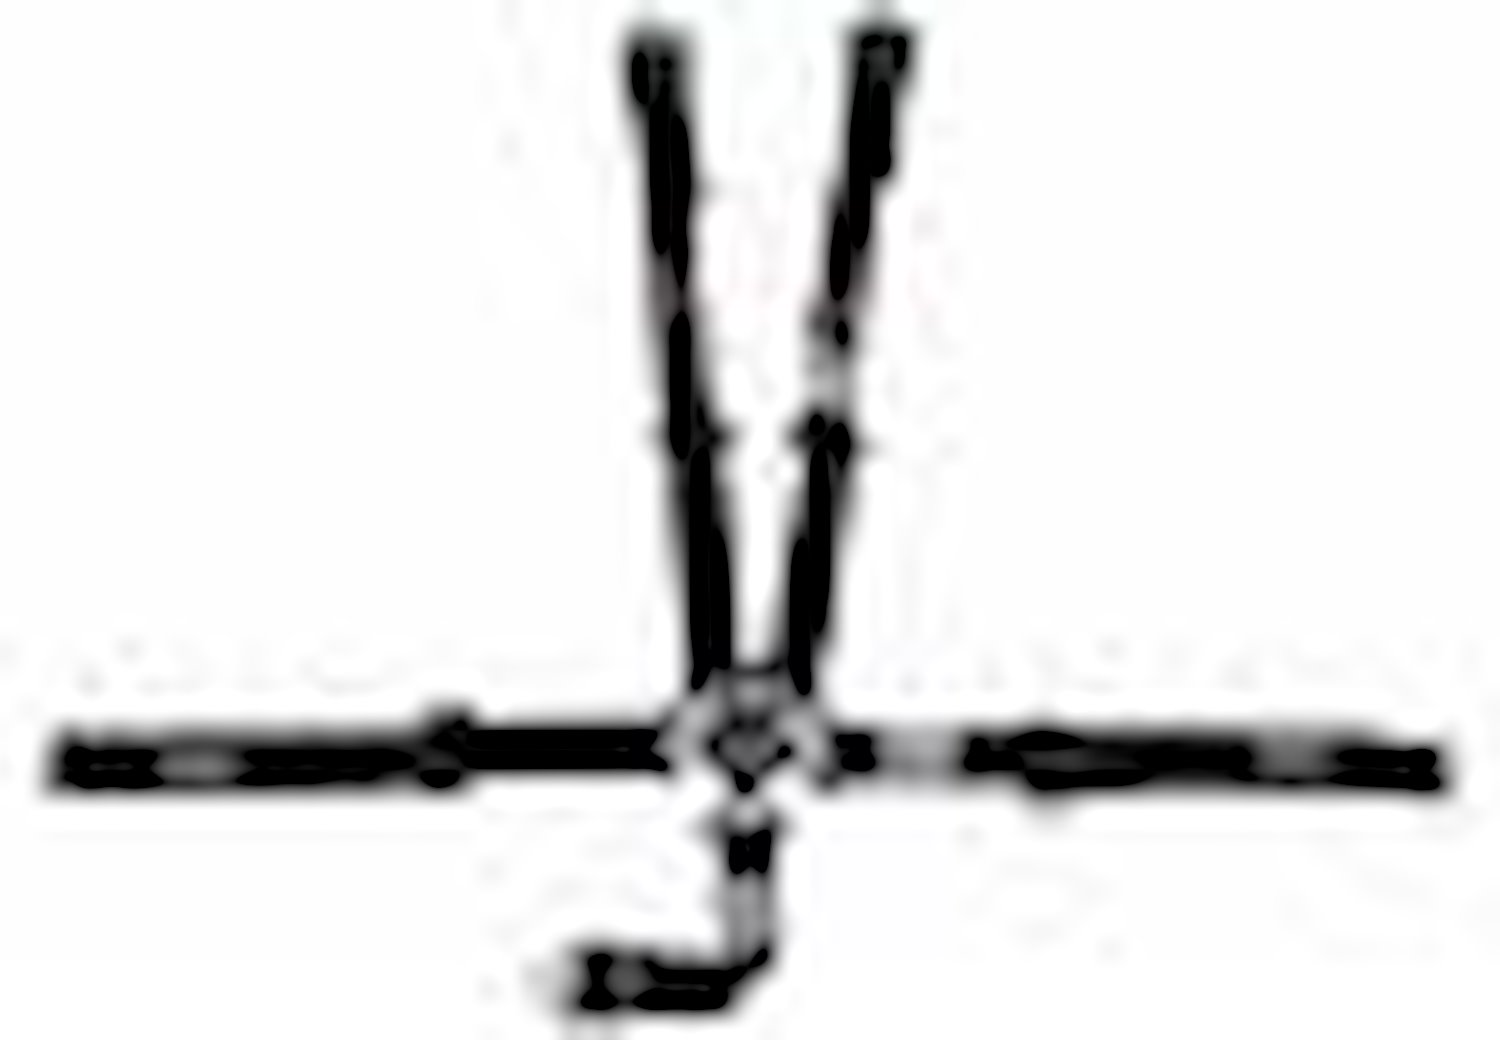 SFI 16.1 CAM-LOCK HARNESS 2 PULL DOWN Lap Belt 2 Shoulder Harness Individual ROLL BAR Mount 2 DOUBLE Sub ALL WRAP/BOLT ENDS BLUE